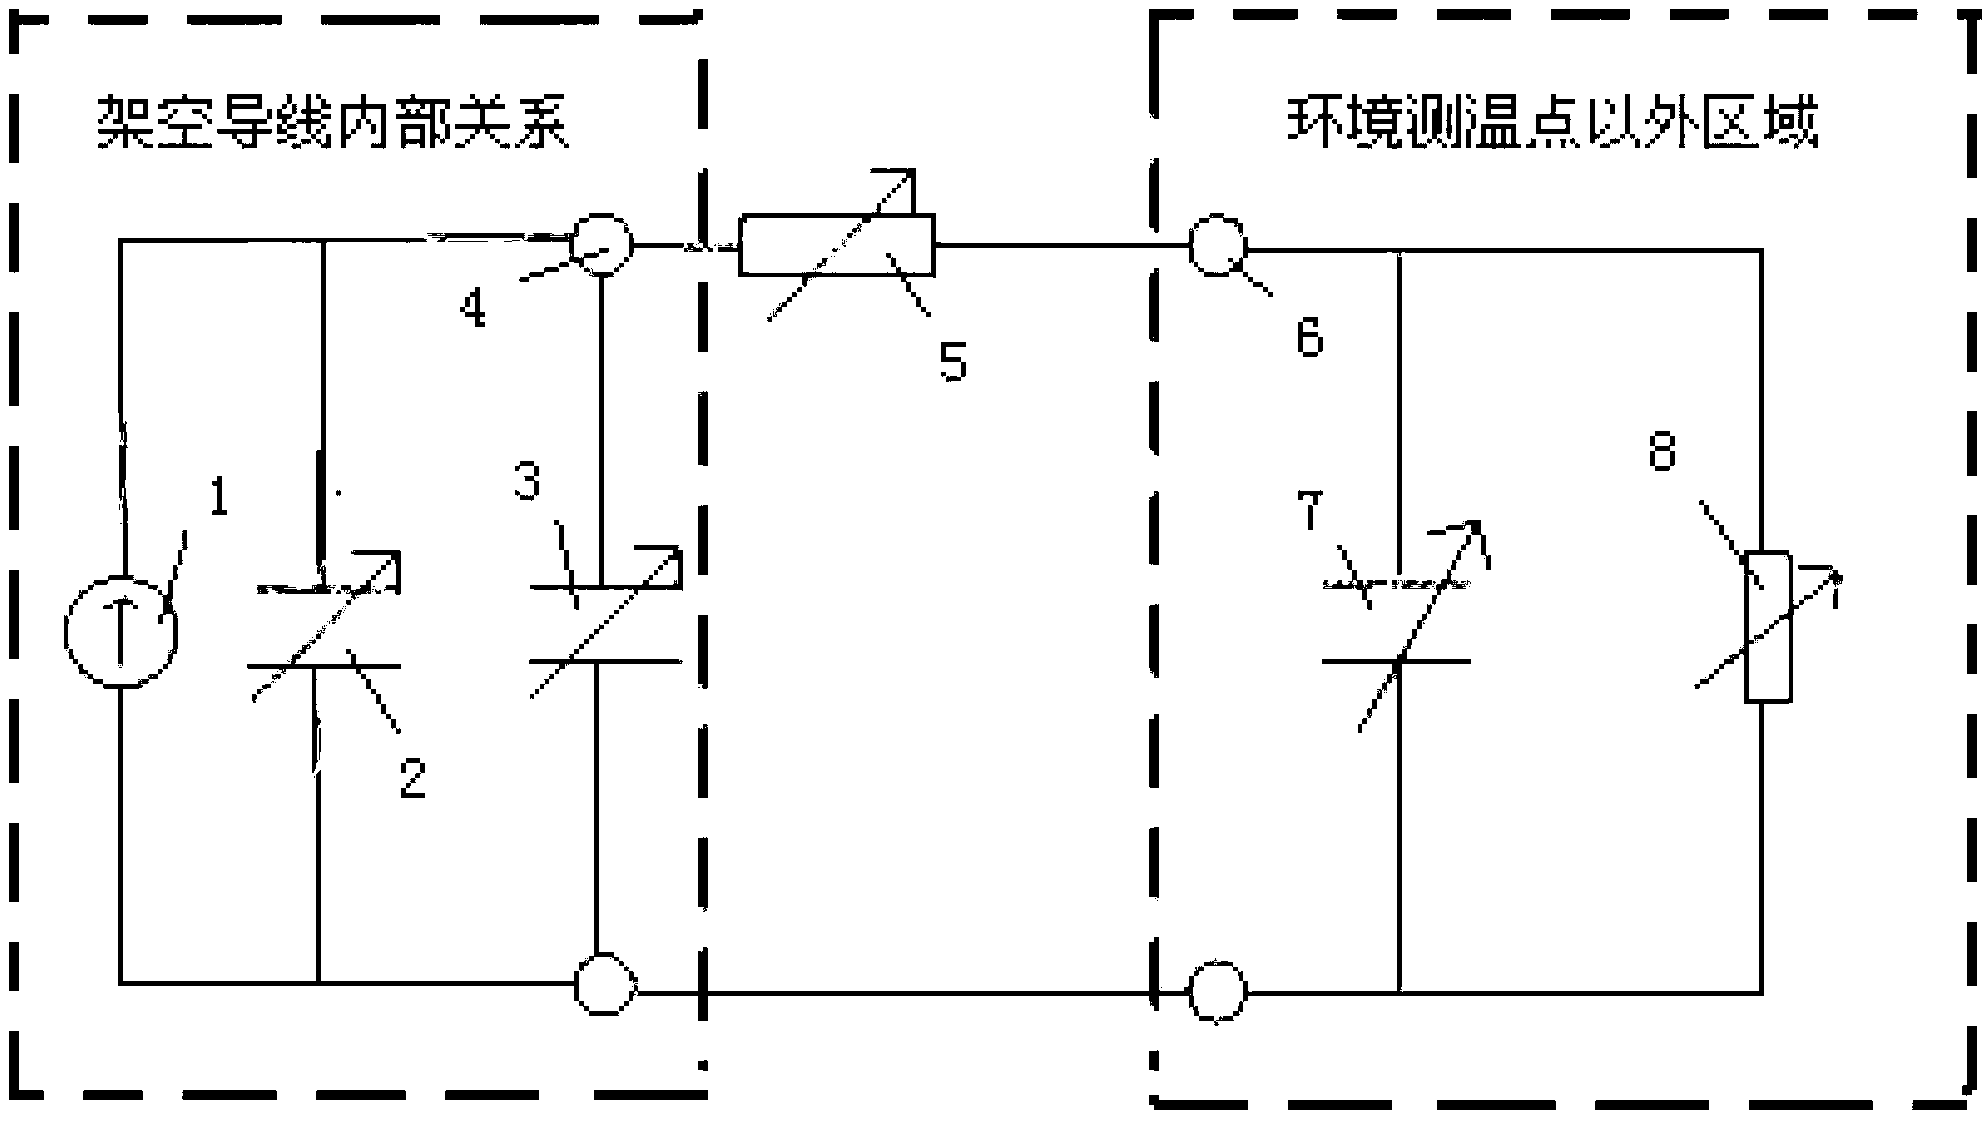 Online temperature measuring method for overhead wire